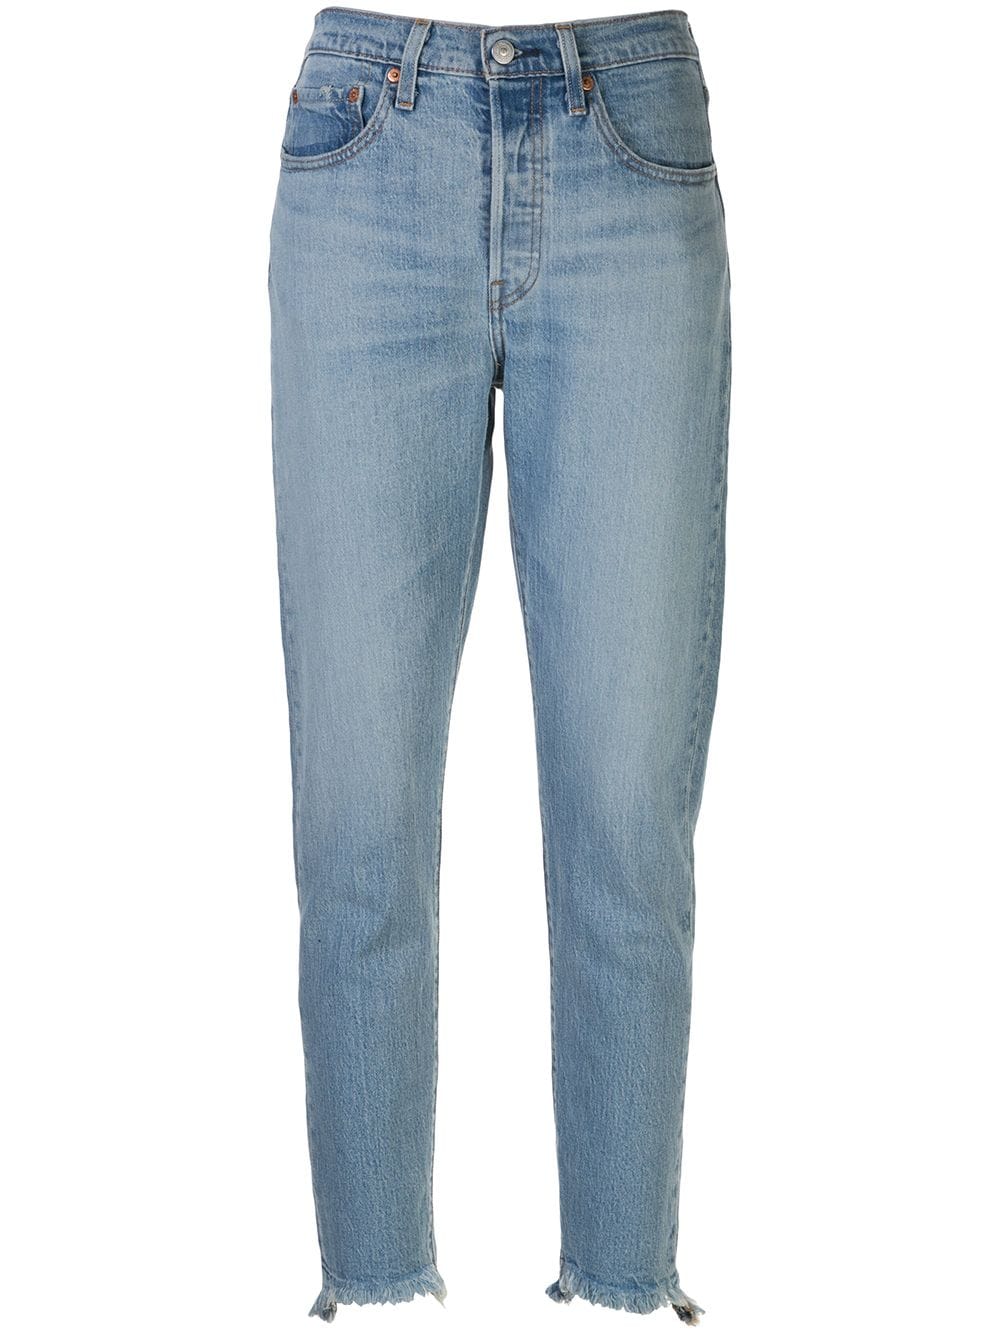 LEVI'S 501 HIGH-RISE SKINNY JEANS